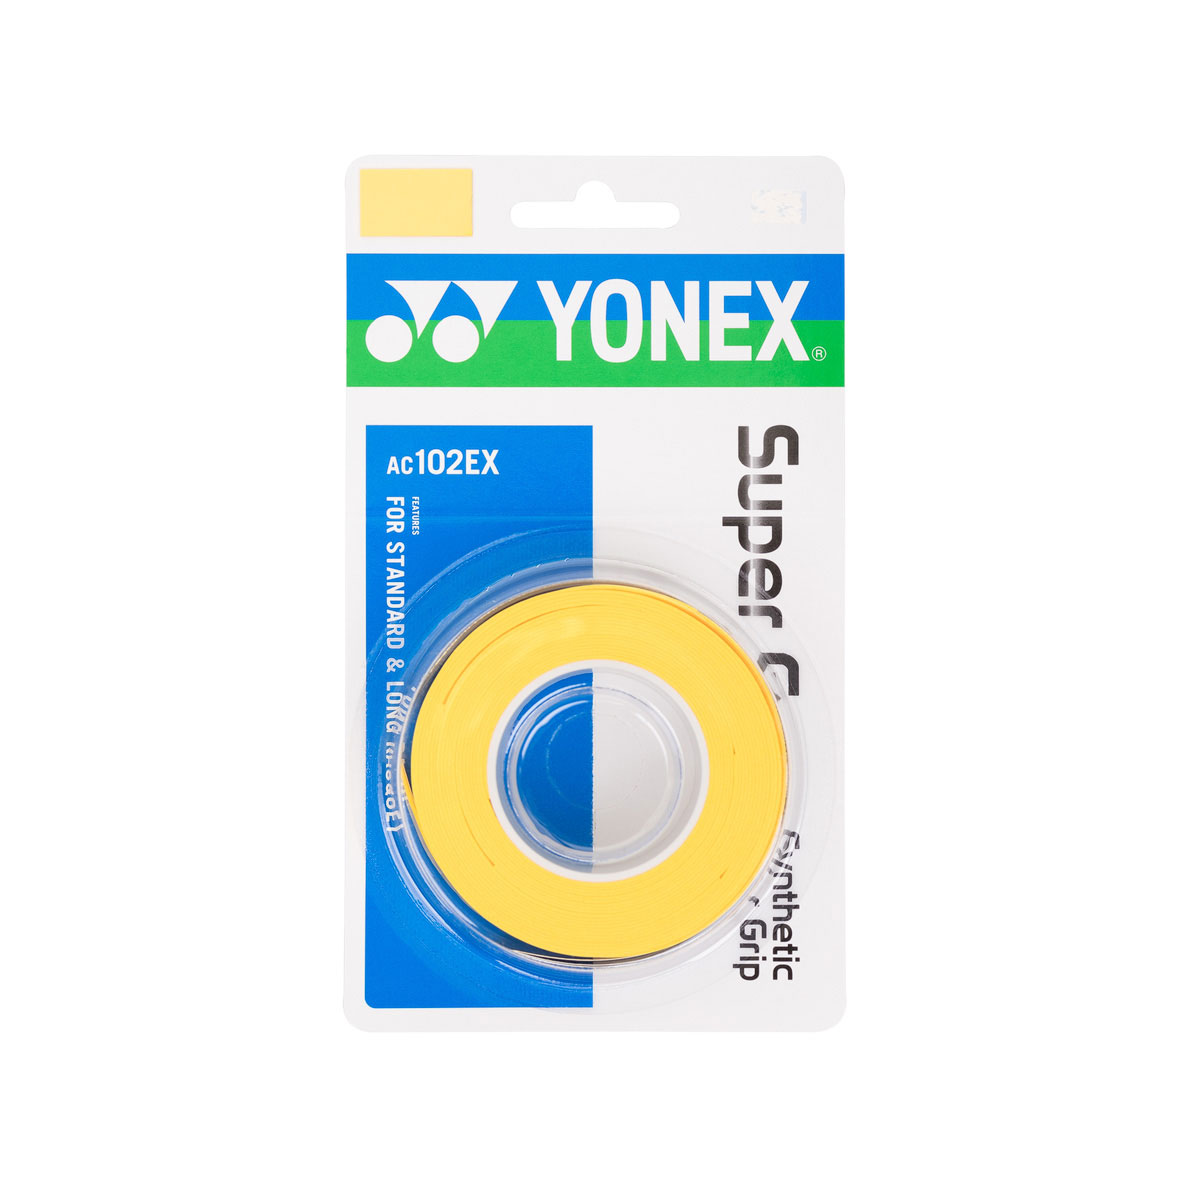 YONEX Super Grap Synthetic Over Grip 3 Stk. - French Pink